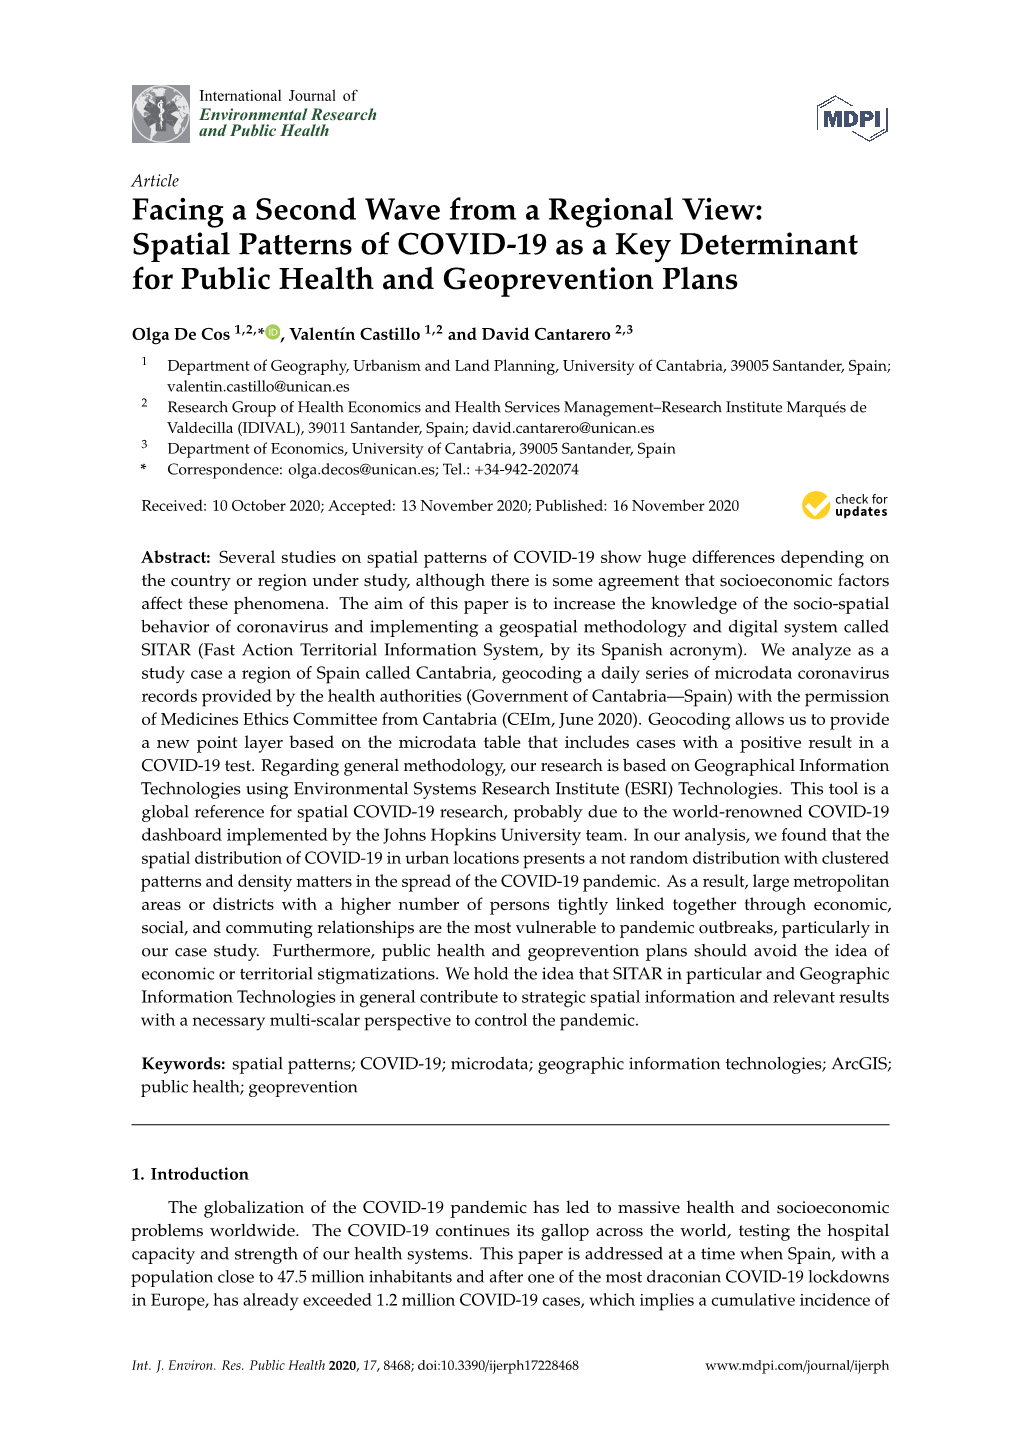 Facing a Second Wave from a Regional View: Spatial Patterns of COVID-19 As a Key Determinant for Public Health and Geoprevention Plans